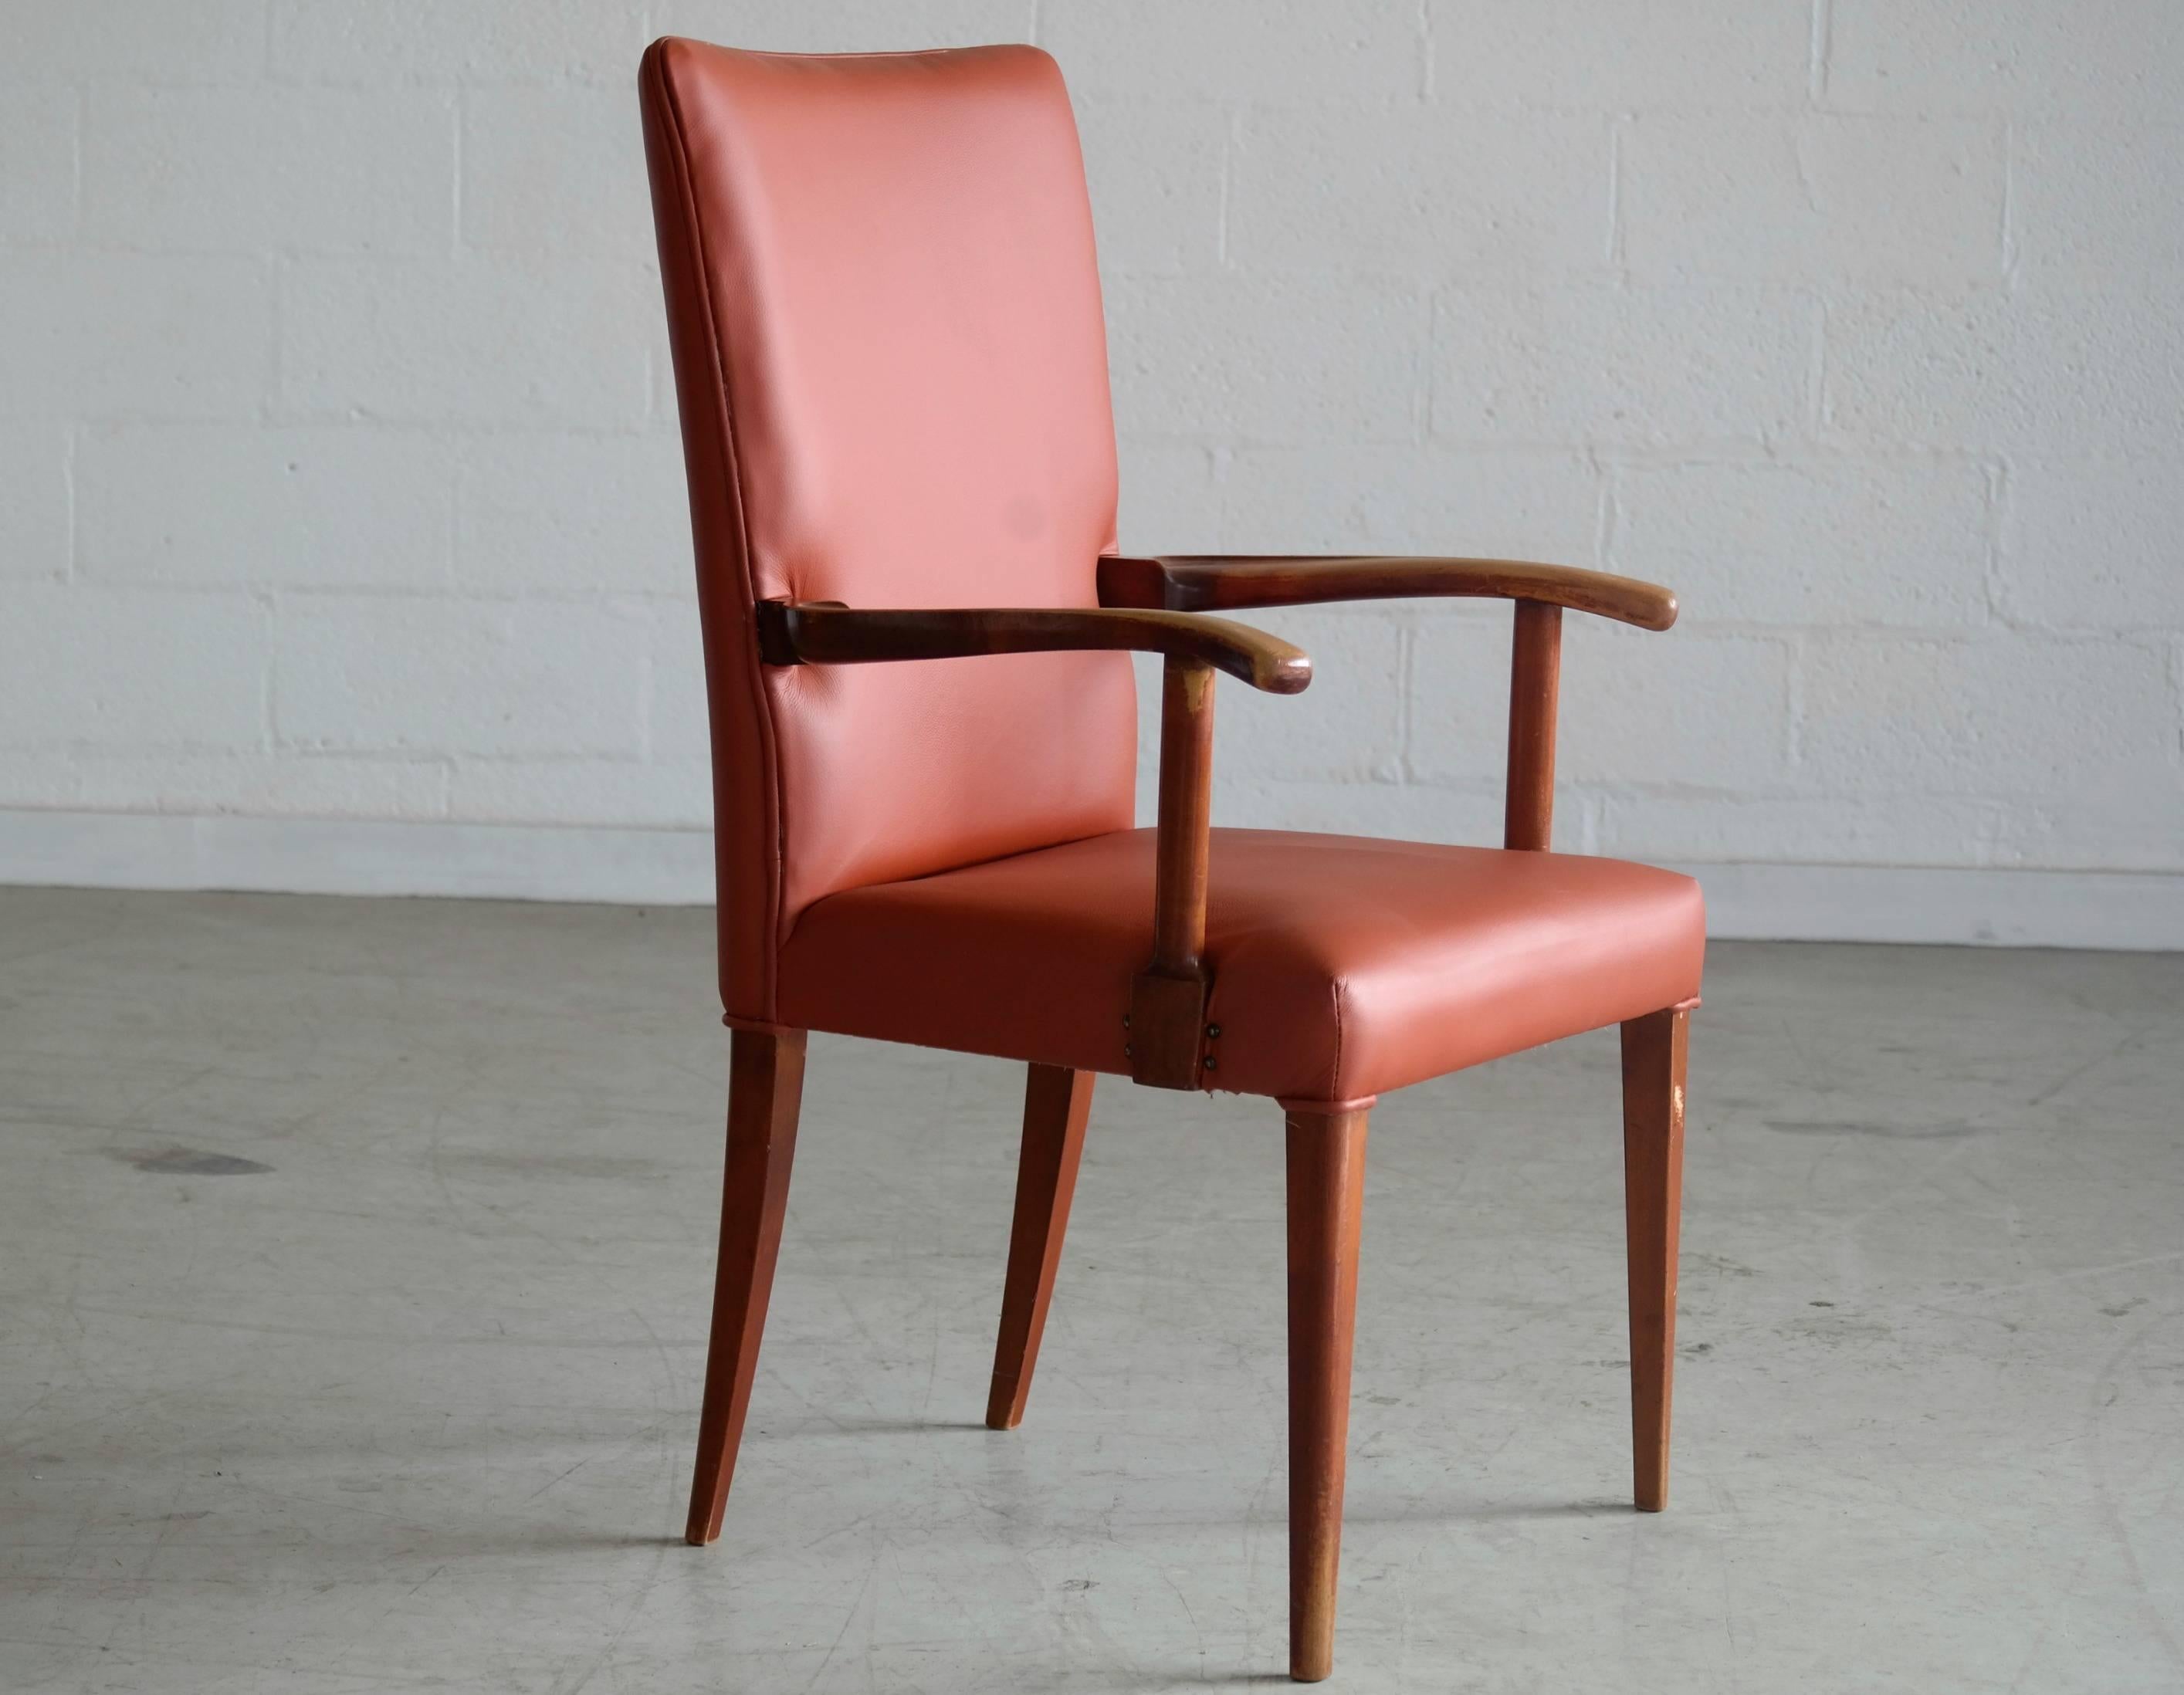 Historical Danish armchair by Frits Henningsen in mahogany and leather originally owned by Erik Ninn-Hansen. The chair stood in his office in the government building, Christiansborg throughout his long career. The chair shows age appropriate patina